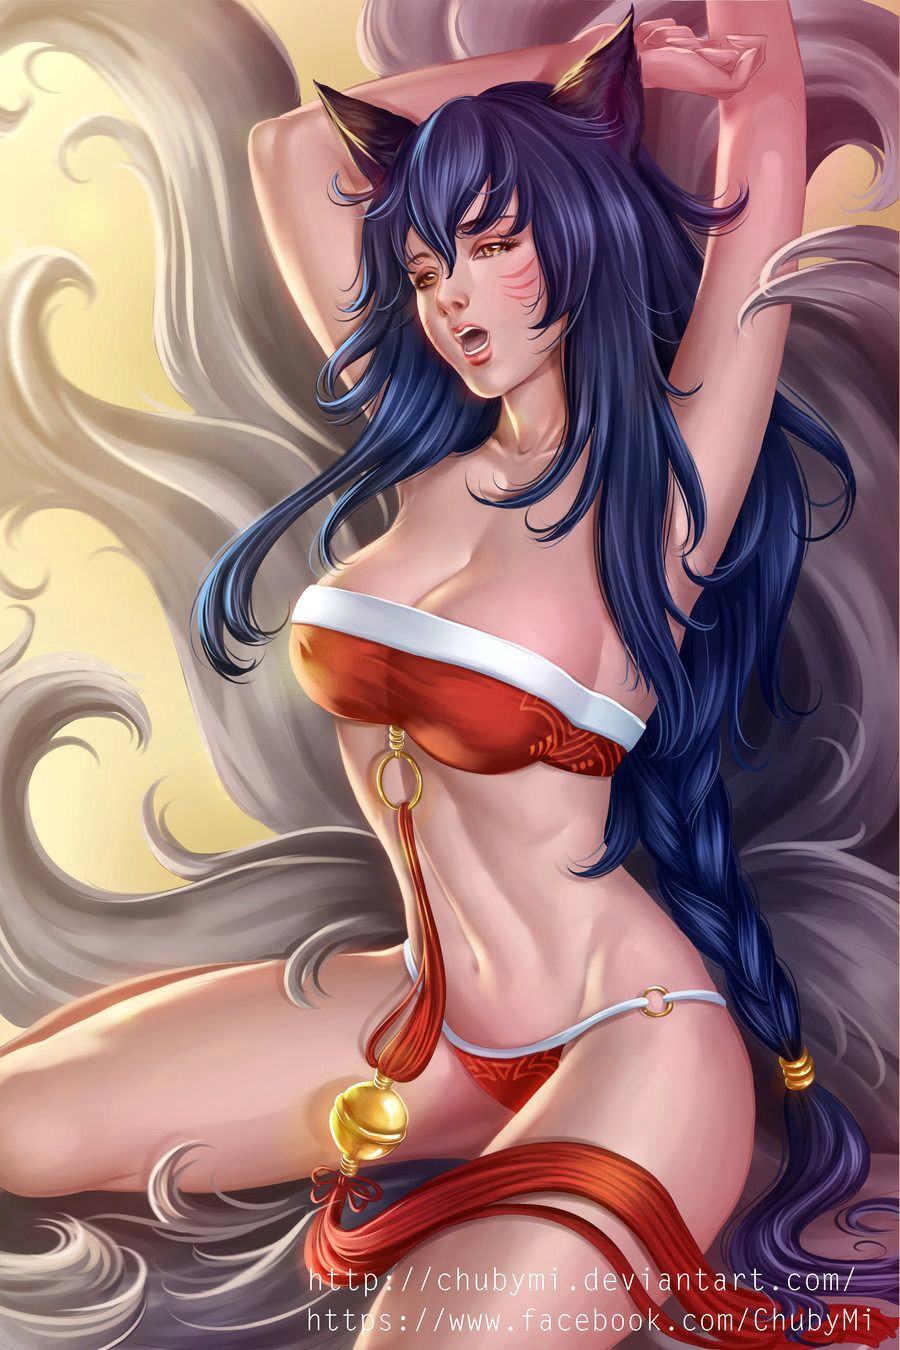 Drawing Anime Lol Pin by Chris On Art Pinterest League Of Legends Art and Anime